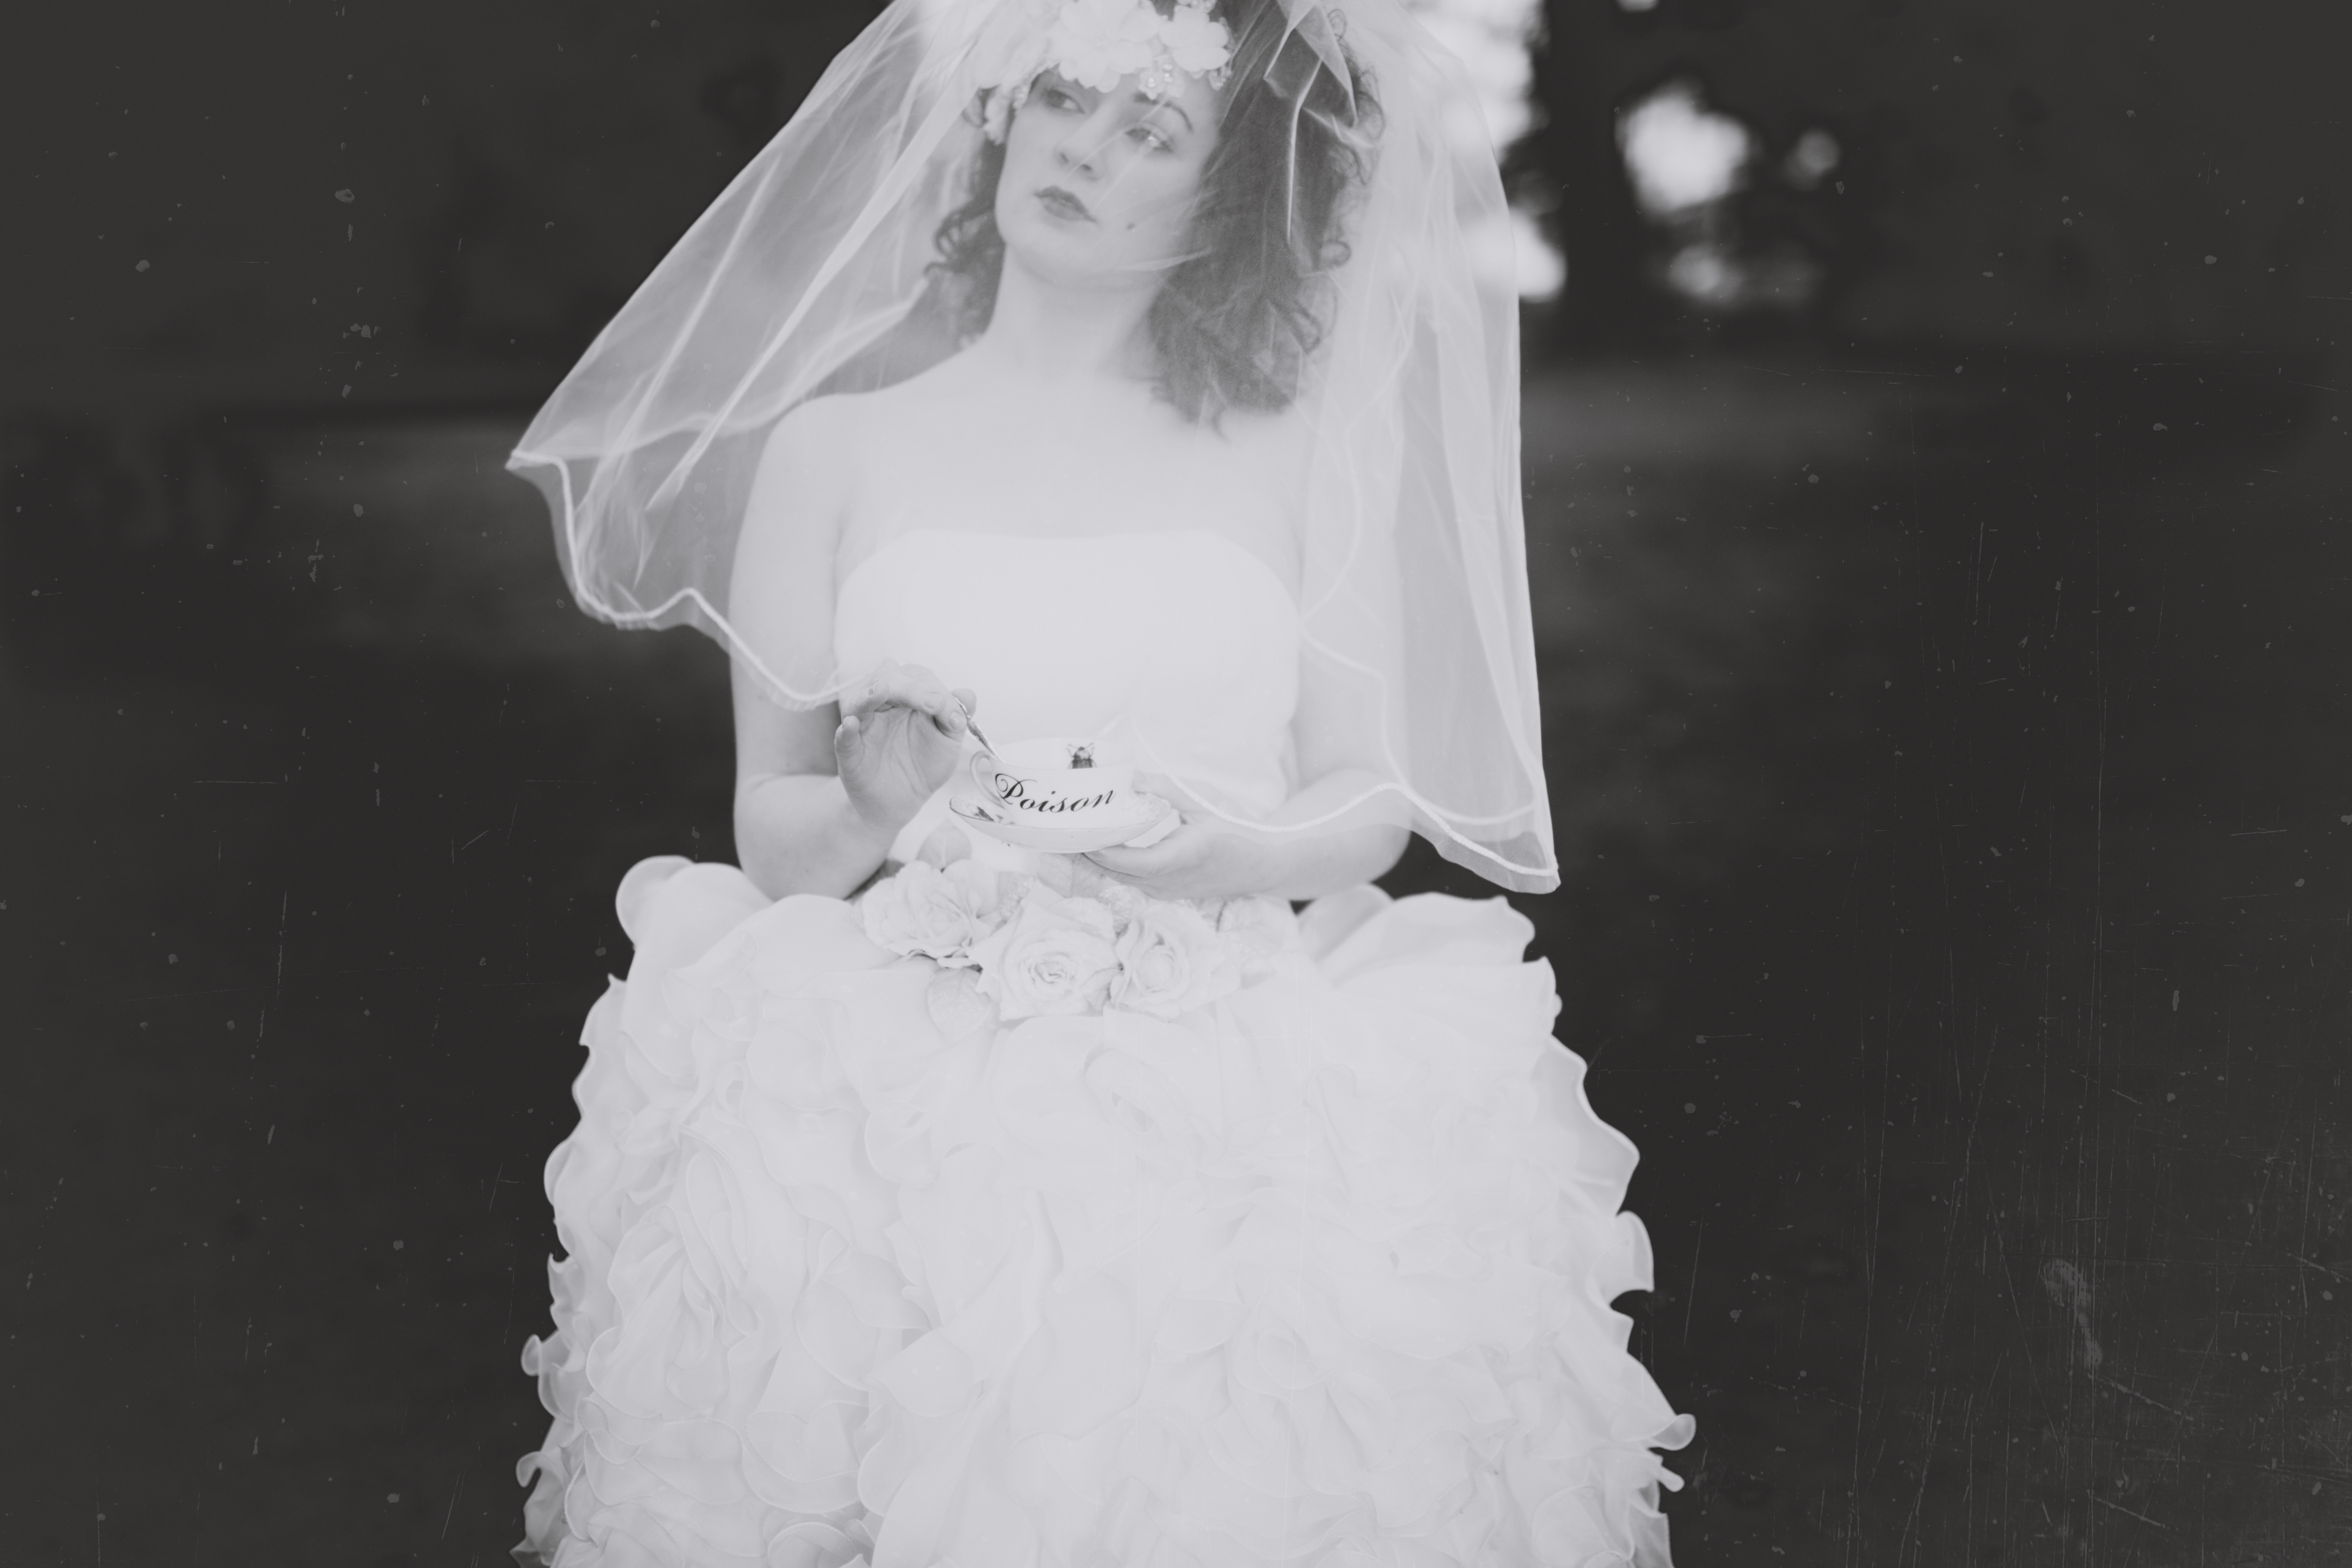 Gothic Style Wedding Inspiration- The Nightmare Bride and Alternative Bridal Trends